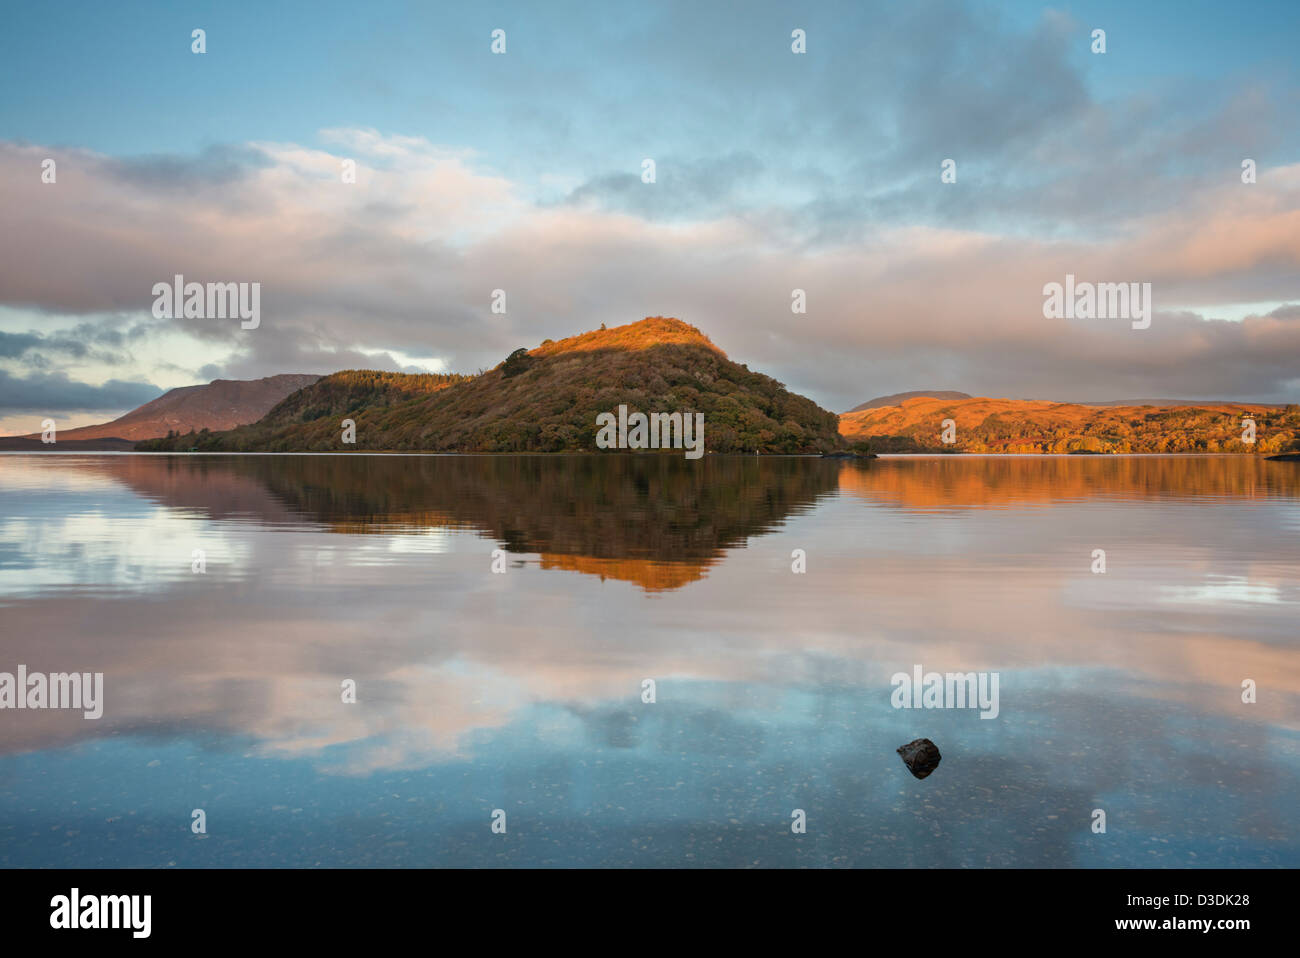 Early morning in autumn on the north-western arm of Lough Corrib, near Doon Rocks, Co Galway, Ireland Stock Photo